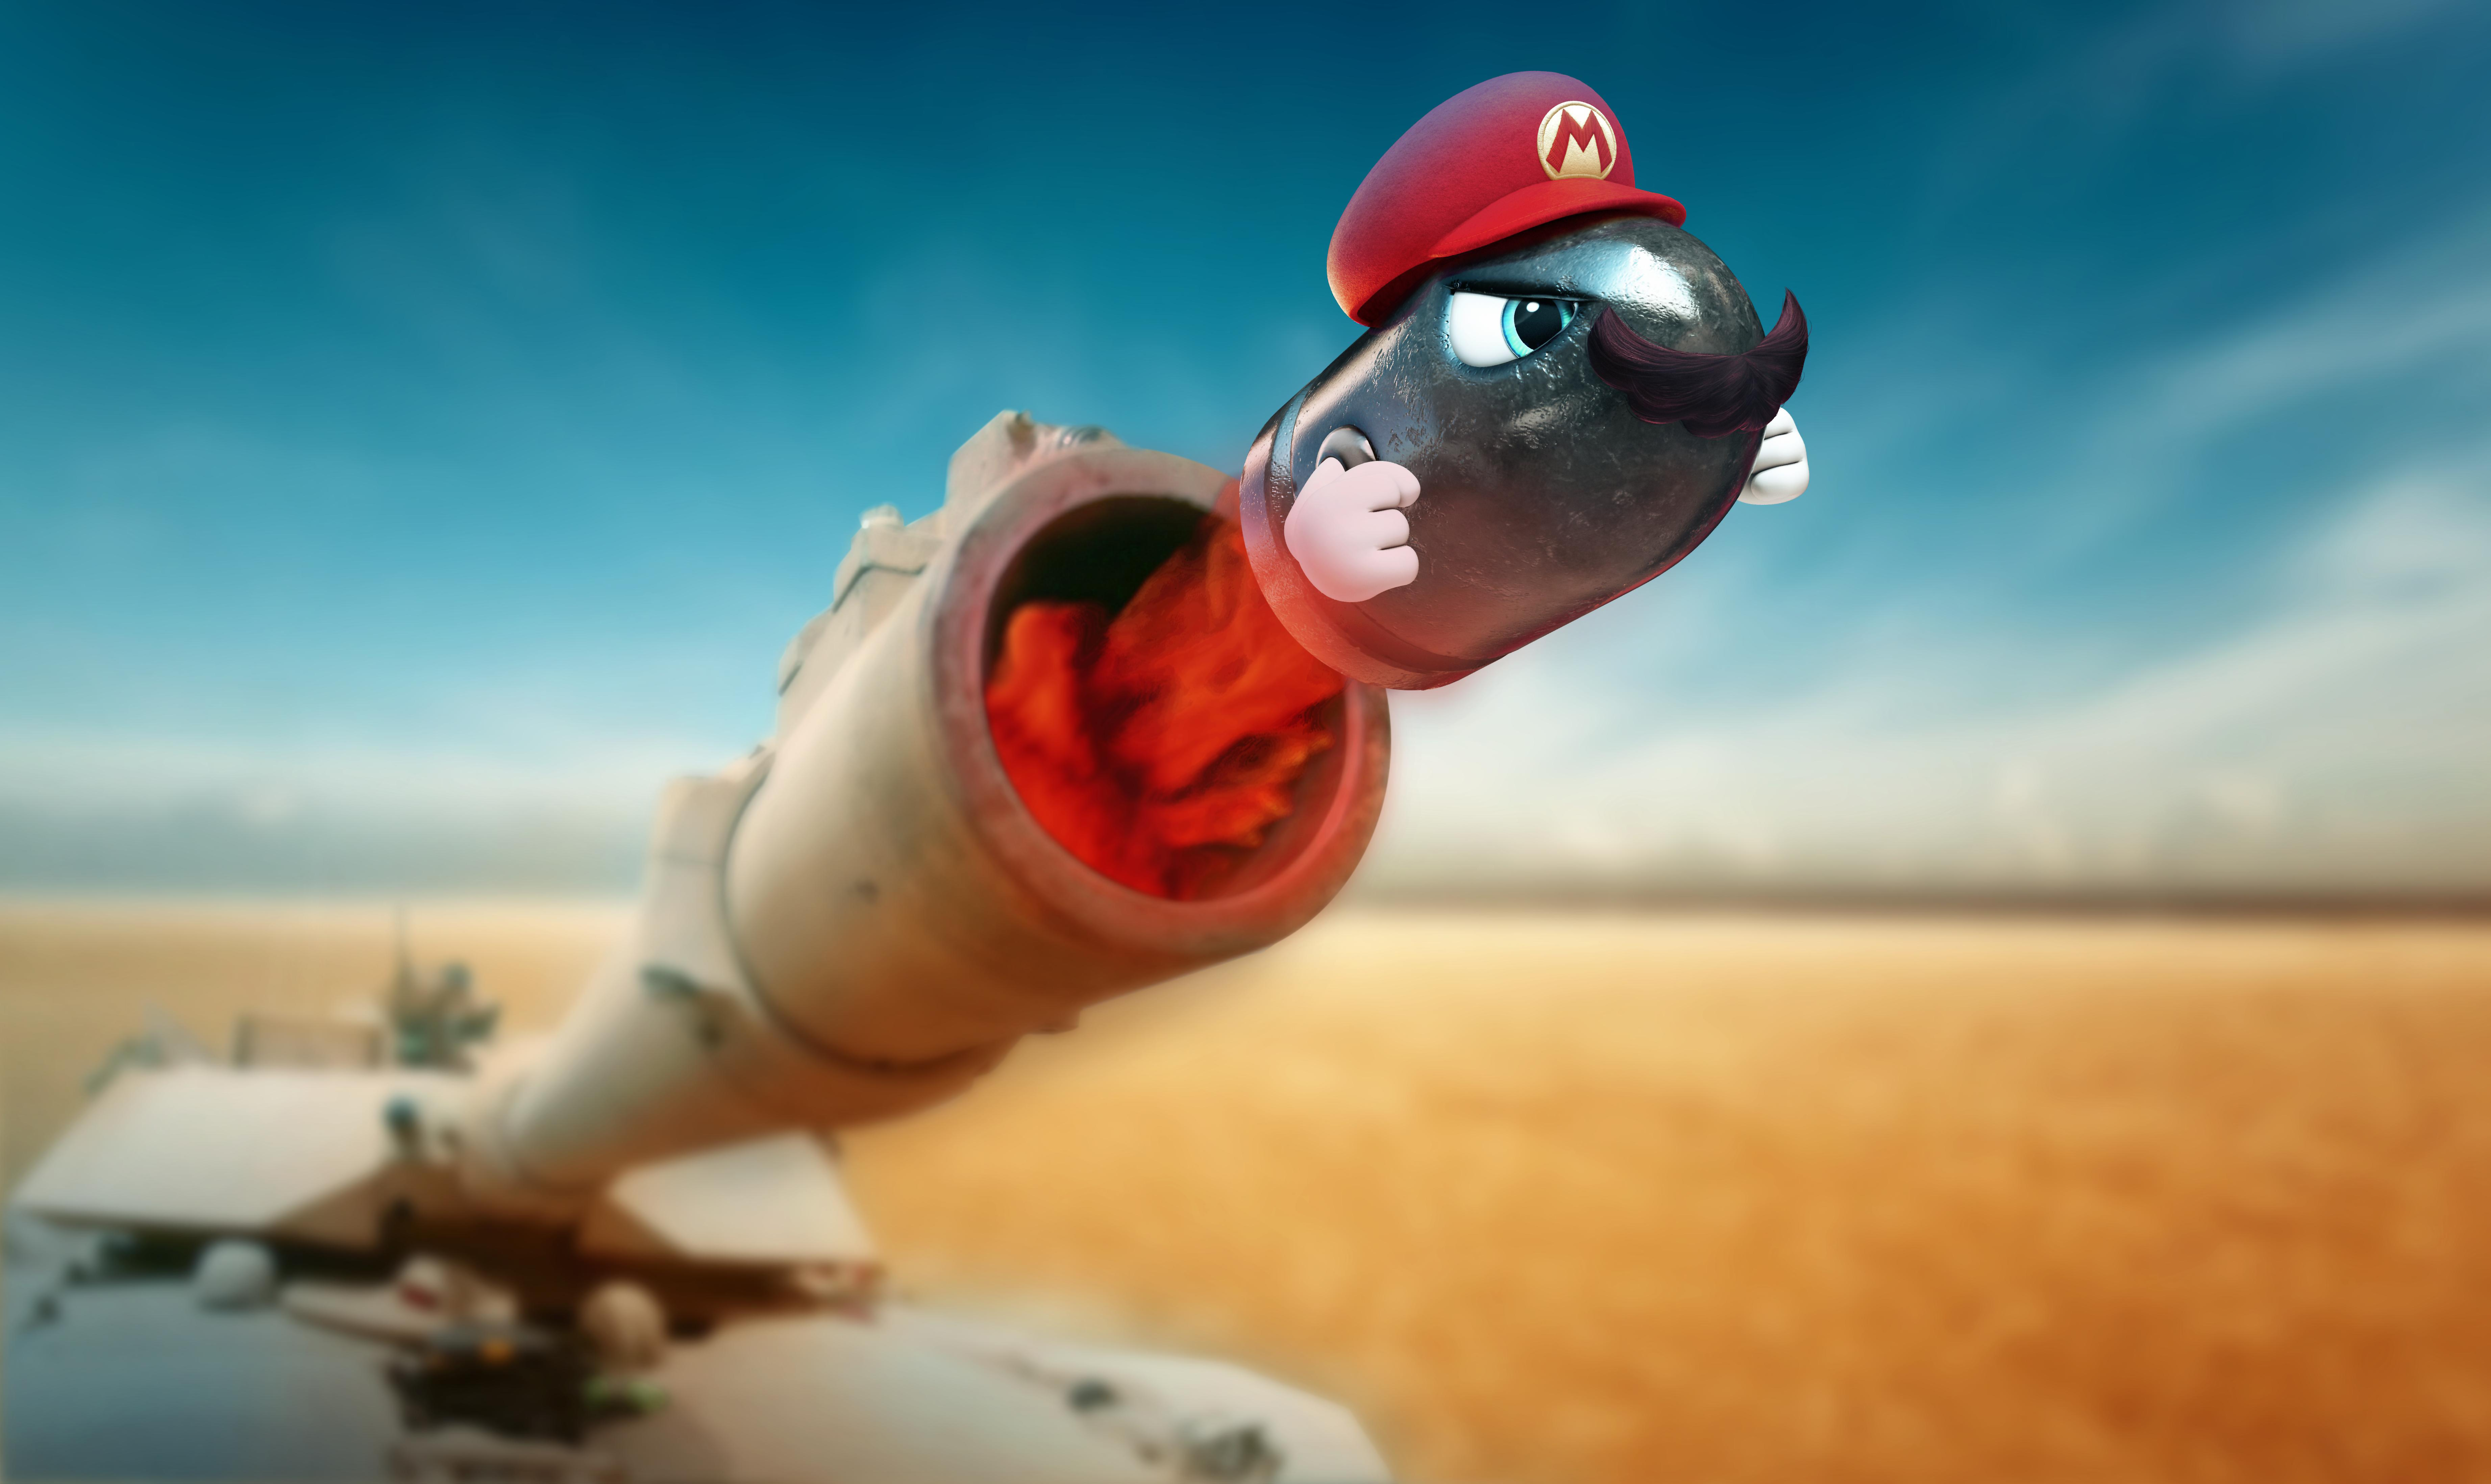 Super Mario Odyssey Wallpapers Pictures Images Afalchi Free images wallpape [afalchi.blogspot.com]